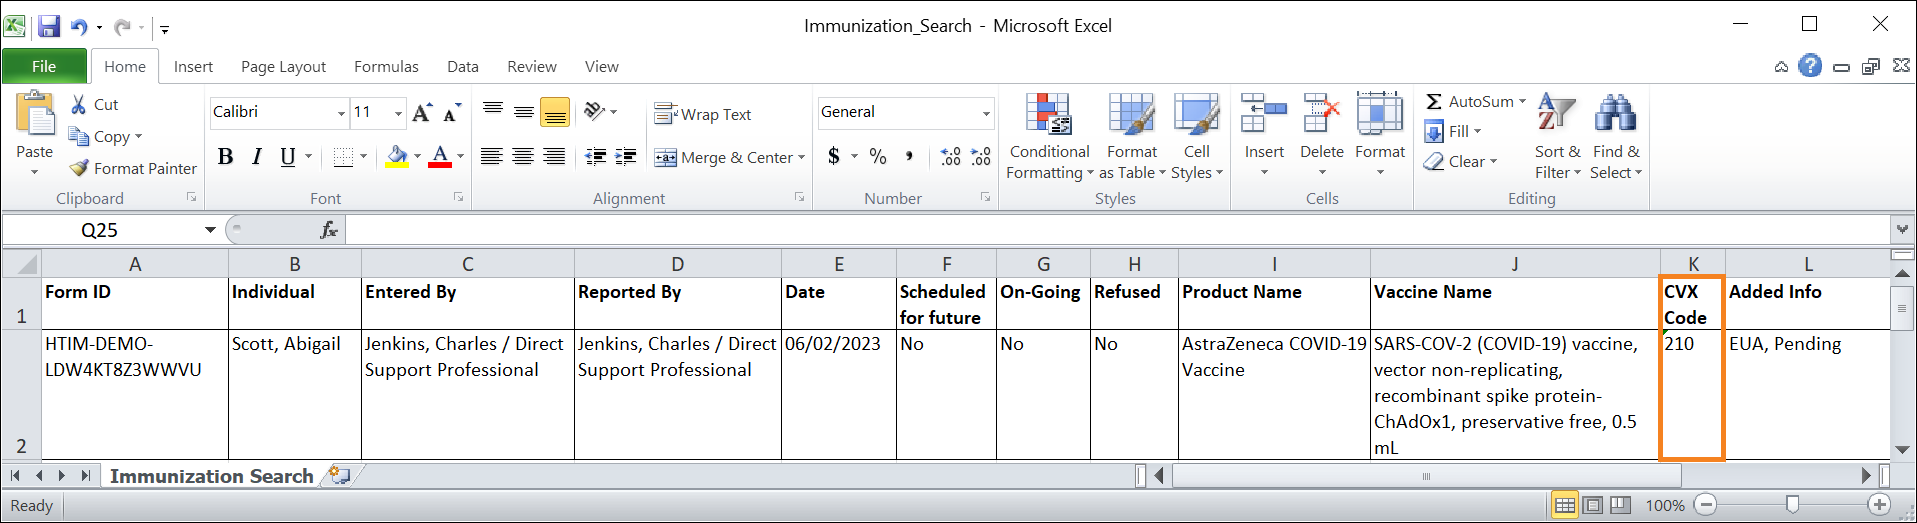 Screenshot showing the CVX Code field in Immunization Search Results Excel Export